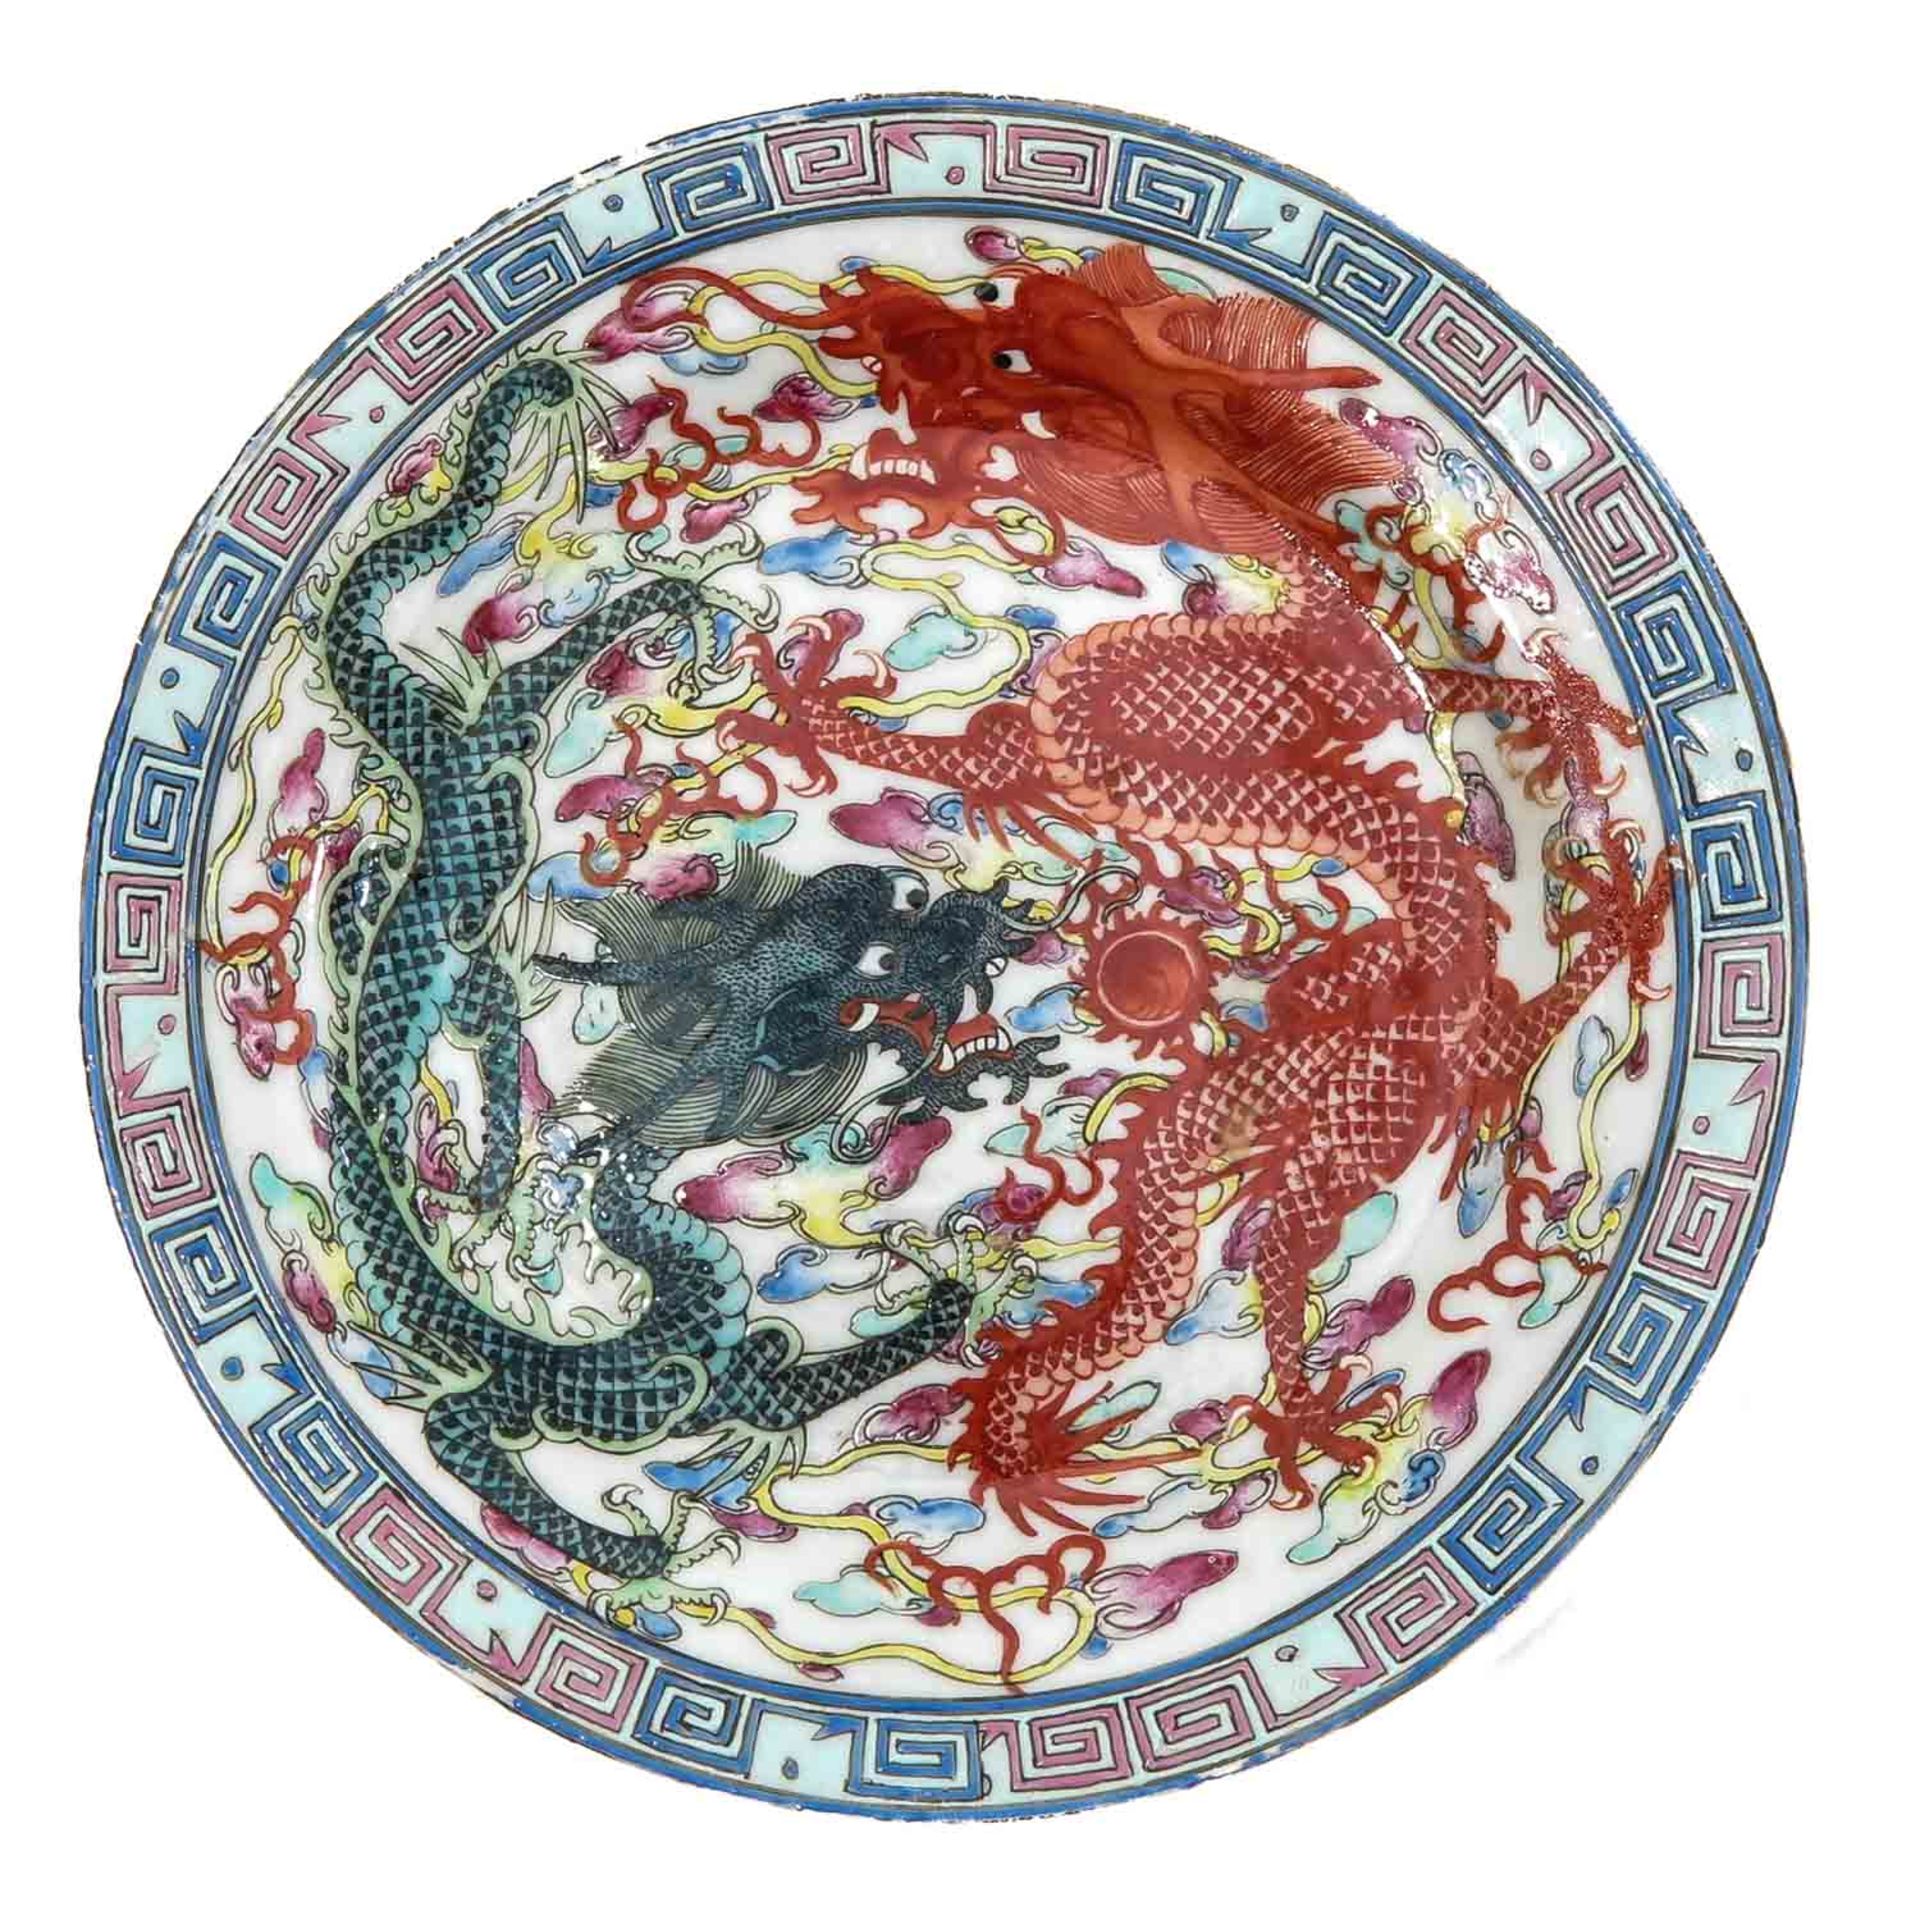 A Collection of 3 Dragon Plates - Image 3 of 10